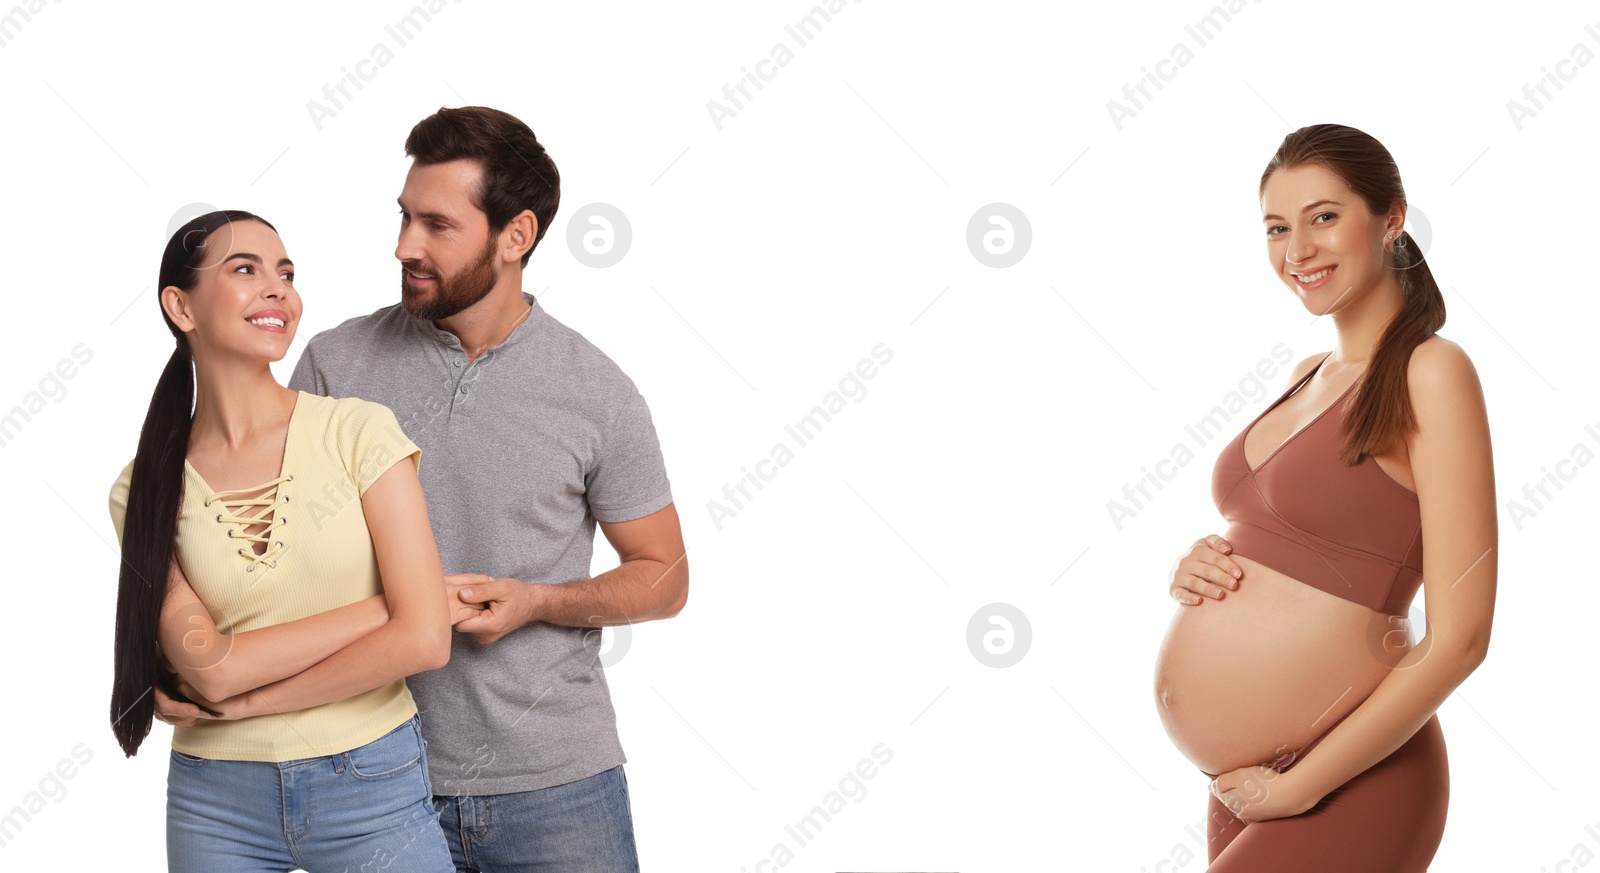 Image of Surrogate mother and intended parents on white background. Banner design